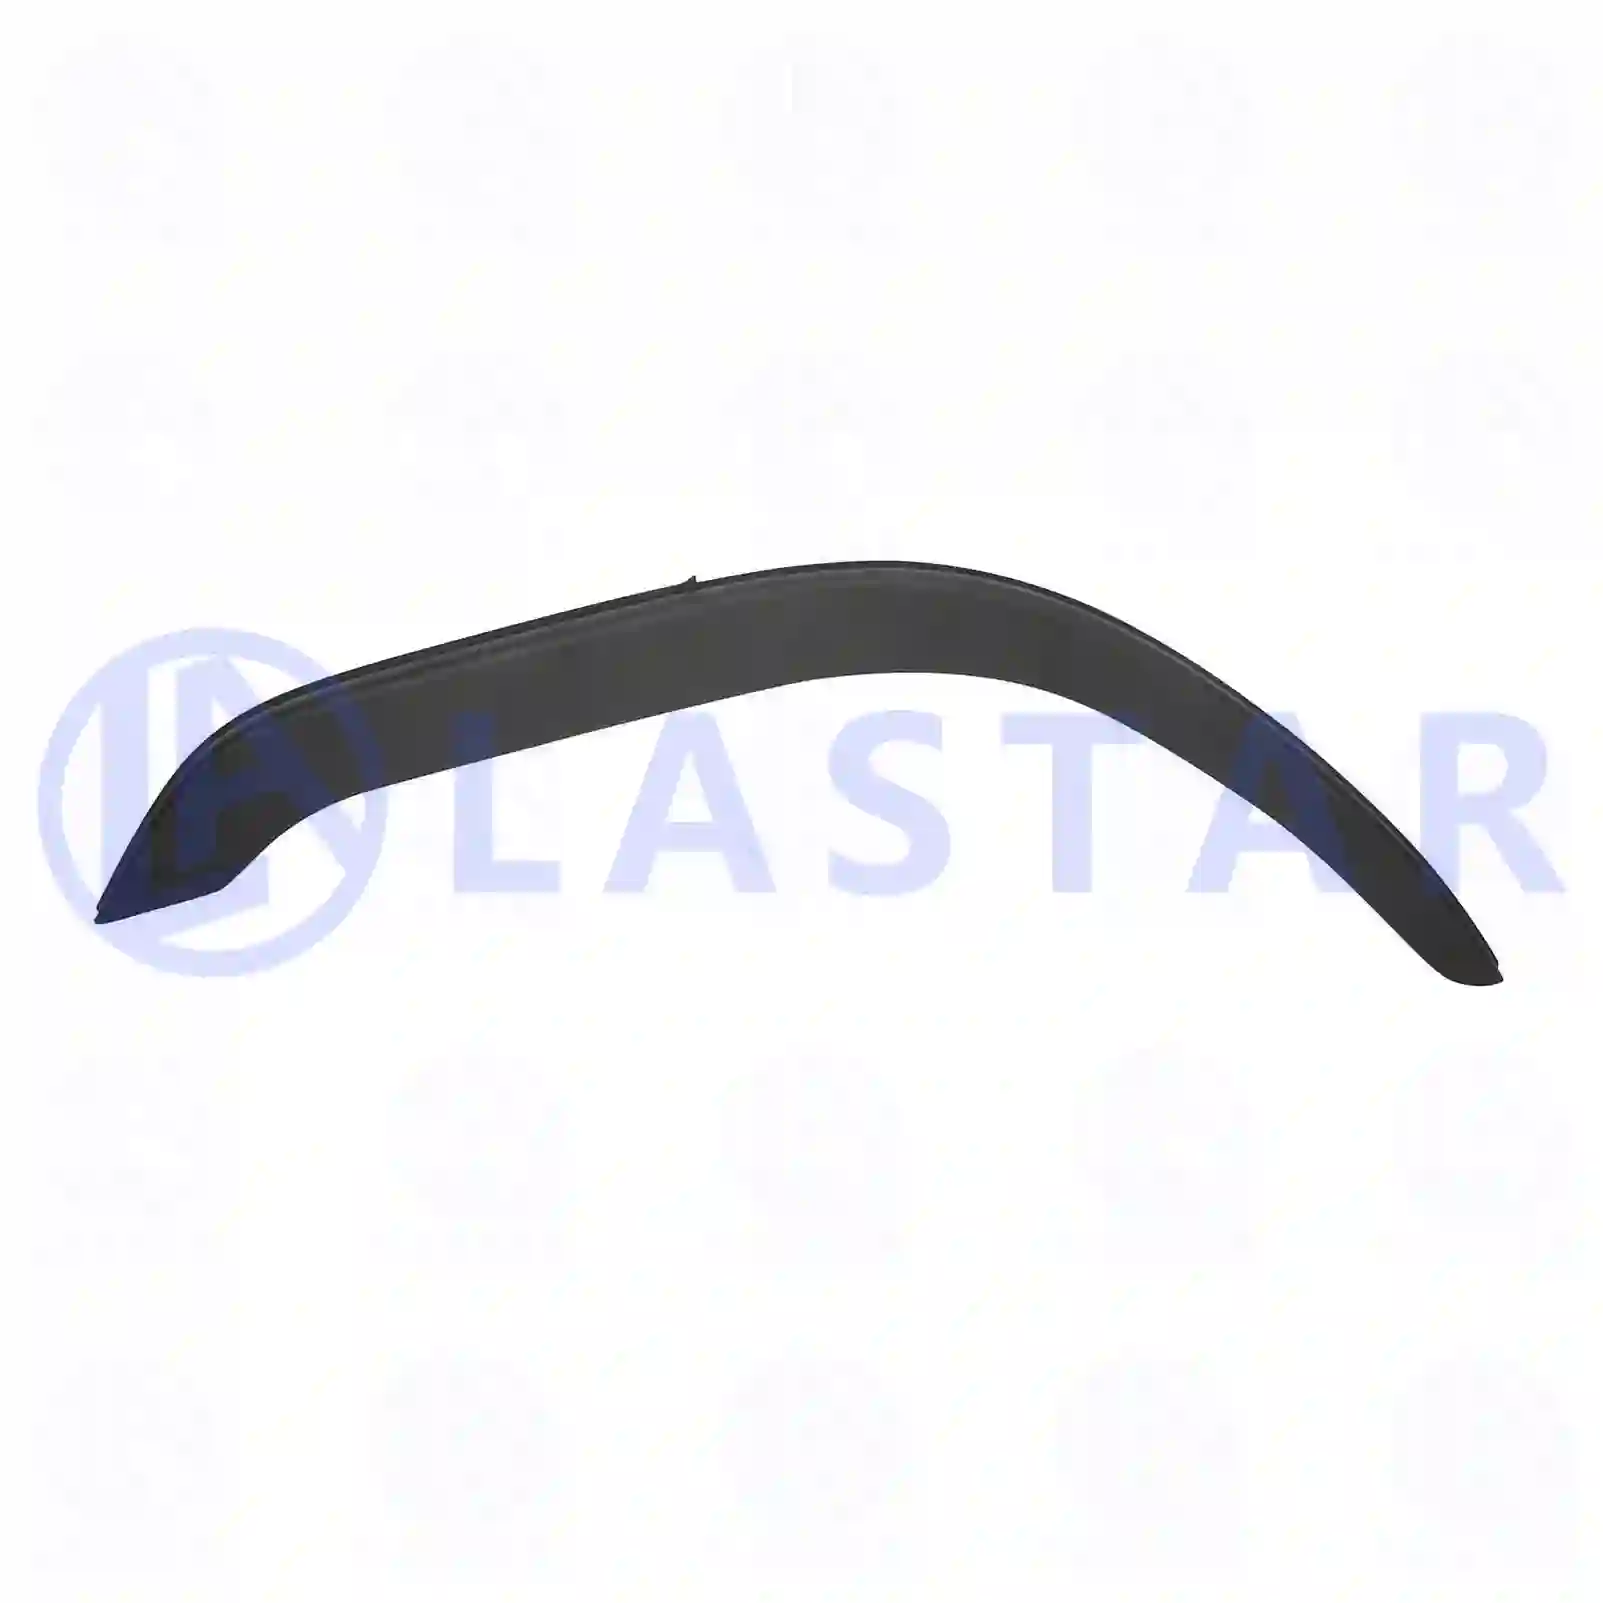 Fender widener, front, right, 77721106, 20529684, 3175934, ZG60763-0008 ||  77721106 Lastar Spare Part | Truck Spare Parts, Auotomotive Spare Parts Fender widener, front, right, 77721106, 20529684, 3175934, ZG60763-0008 ||  77721106 Lastar Spare Part | Truck Spare Parts, Auotomotive Spare Parts